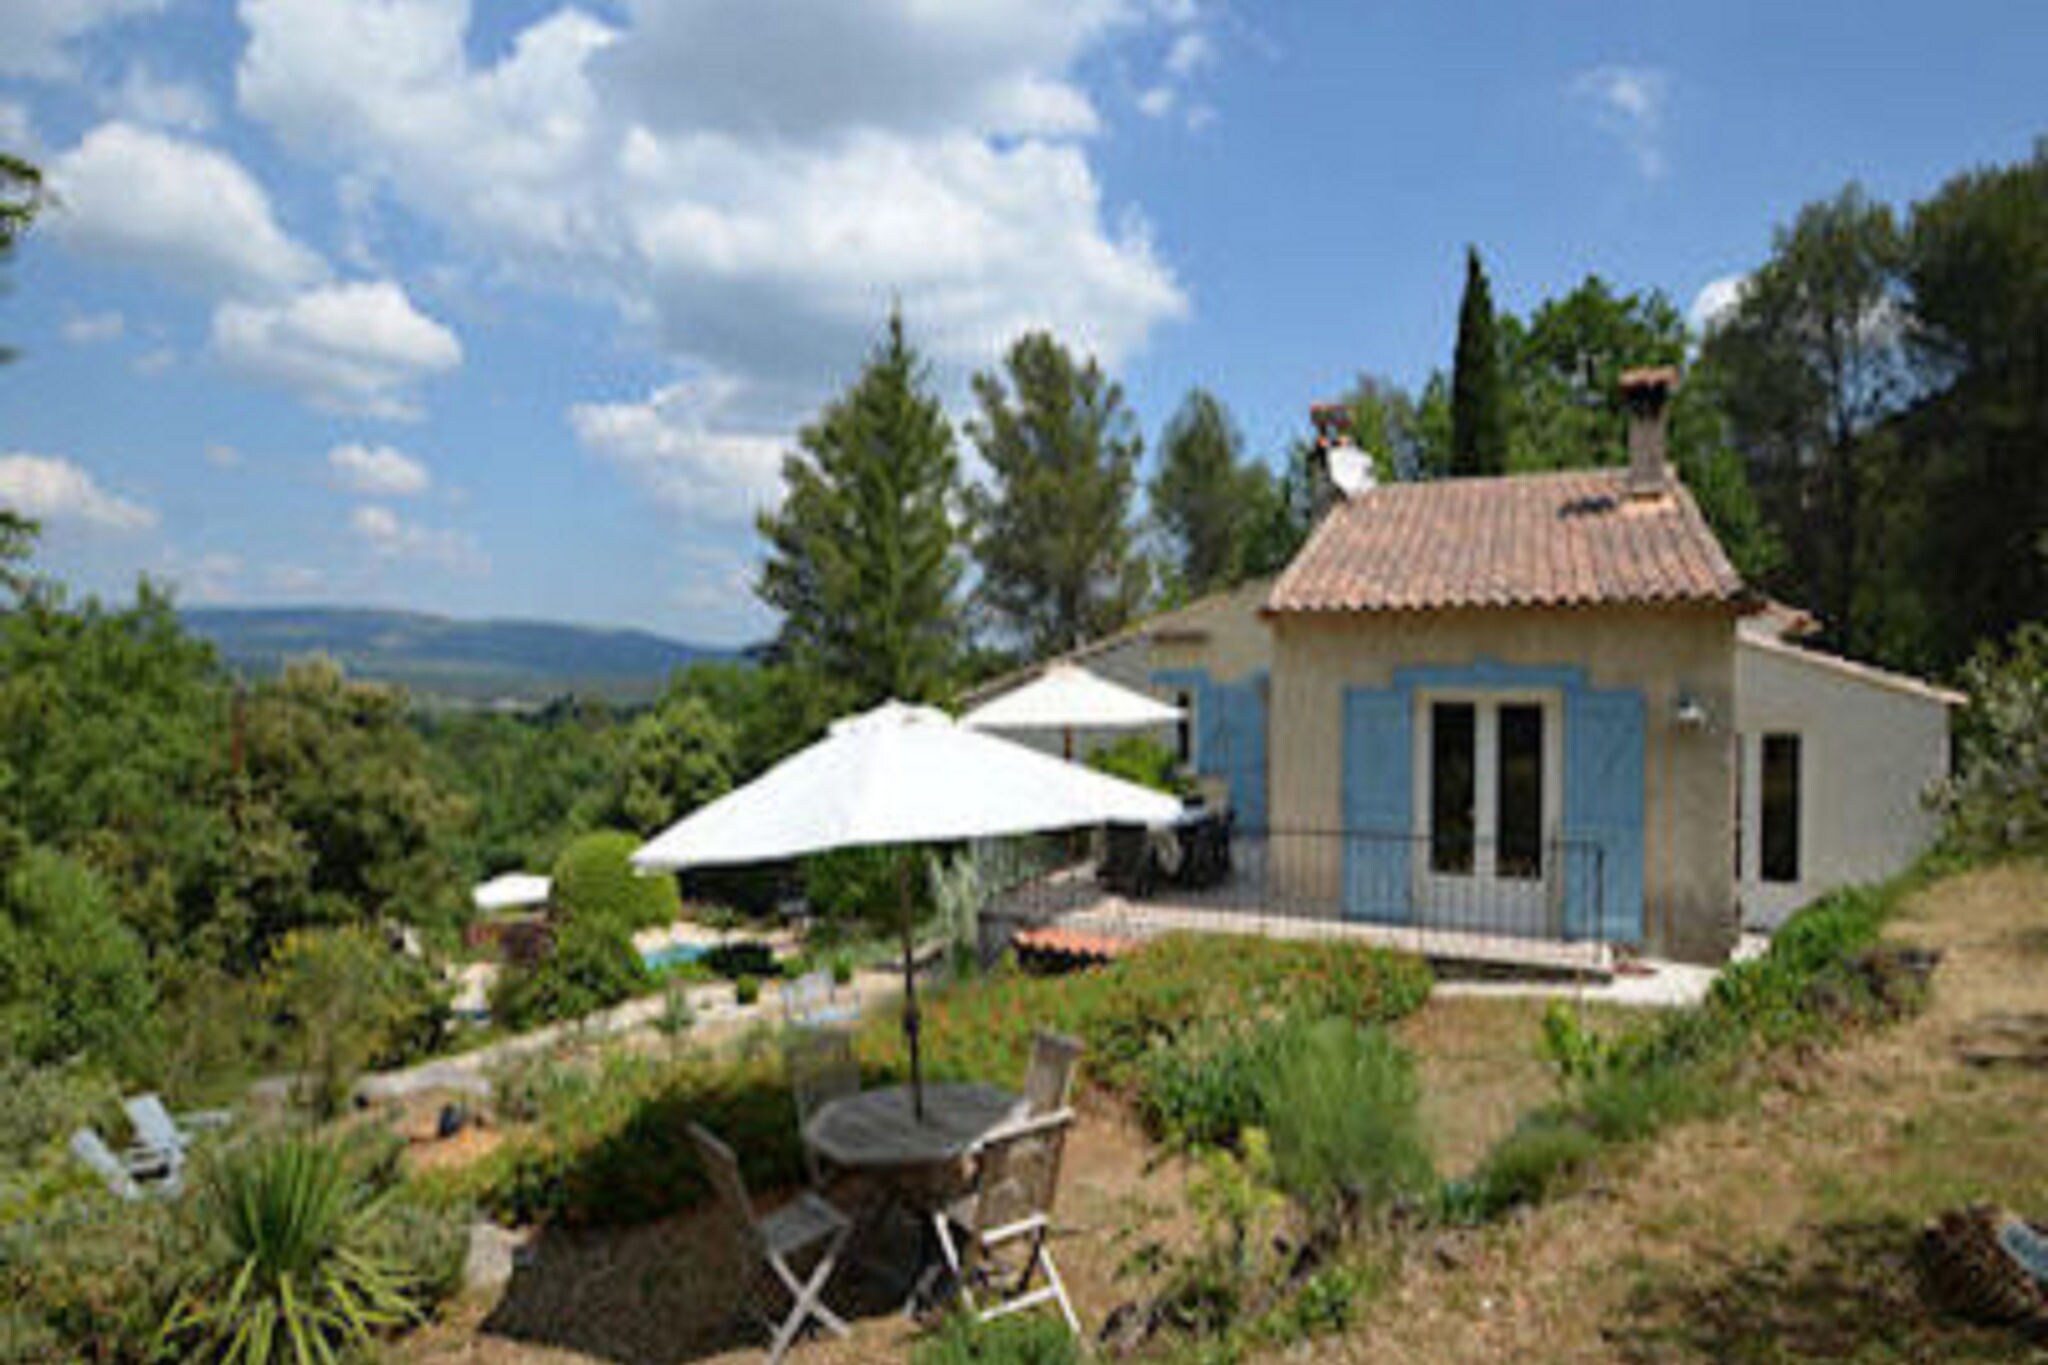 Attractive holiday home with private pool, stunning views, surrounded by nature!